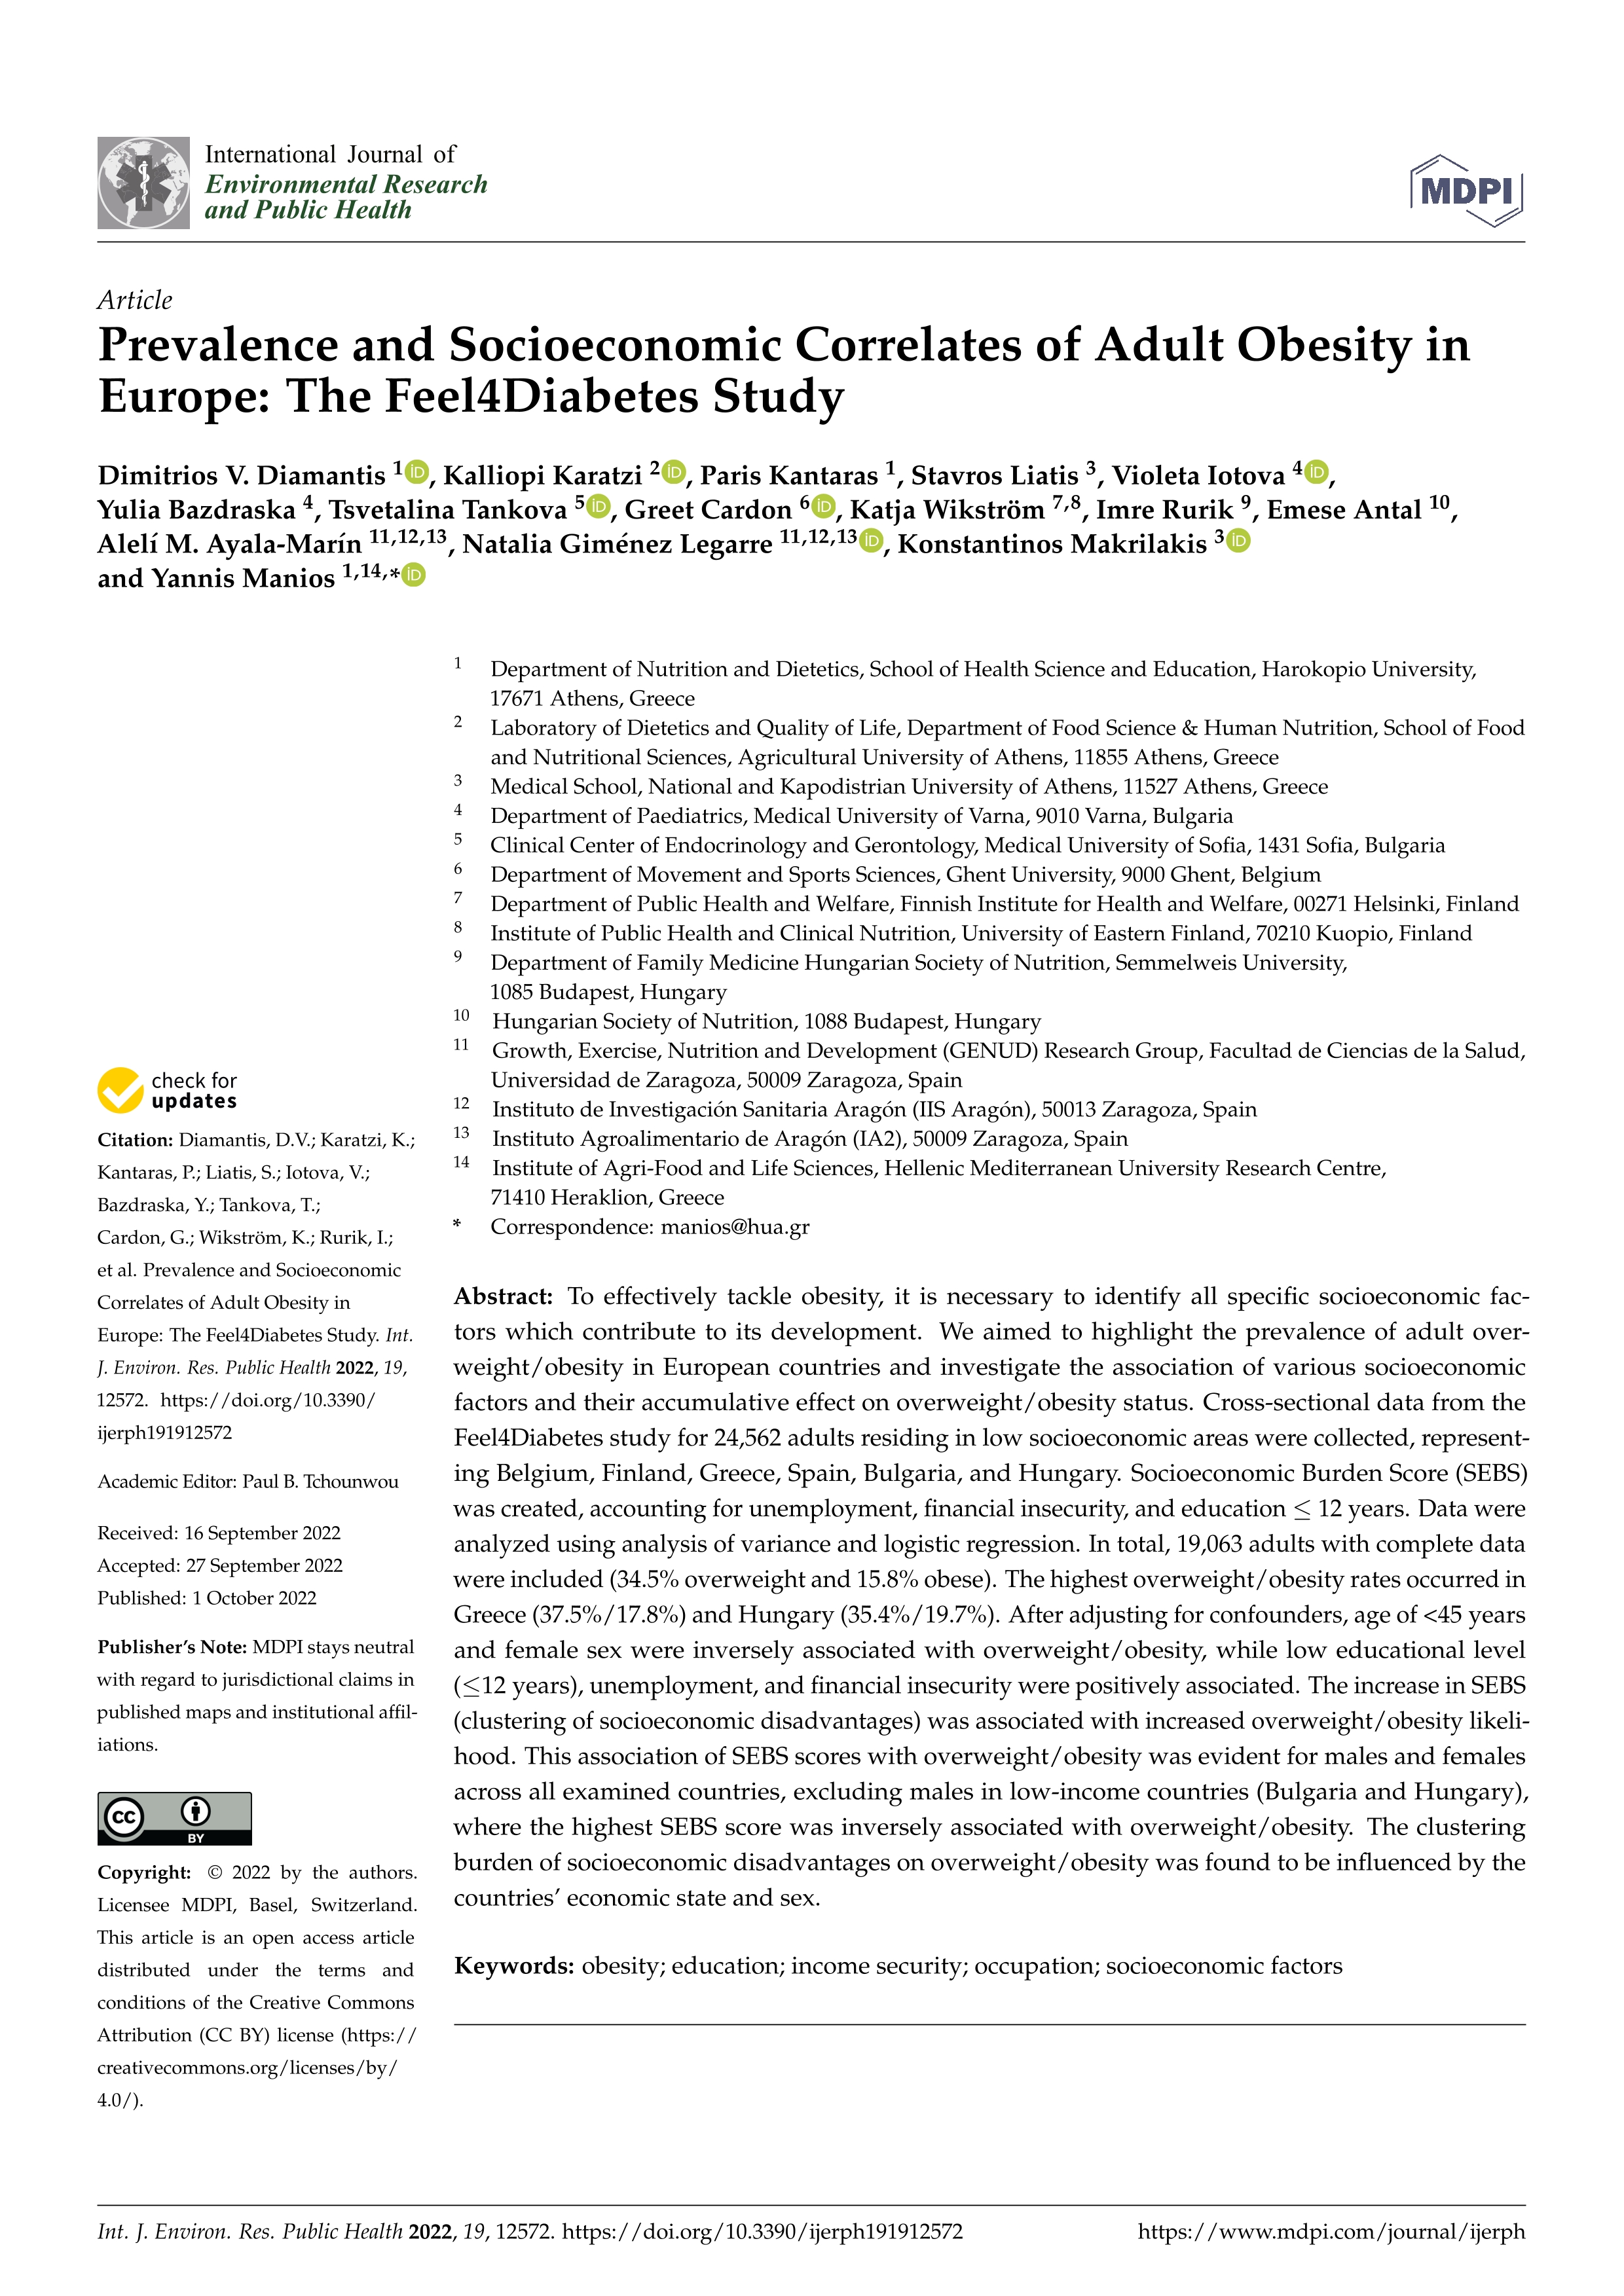 Prevalence and Socioeconomic Correlates of Adult Obesity in Europe: The Feel4Diabetes Study